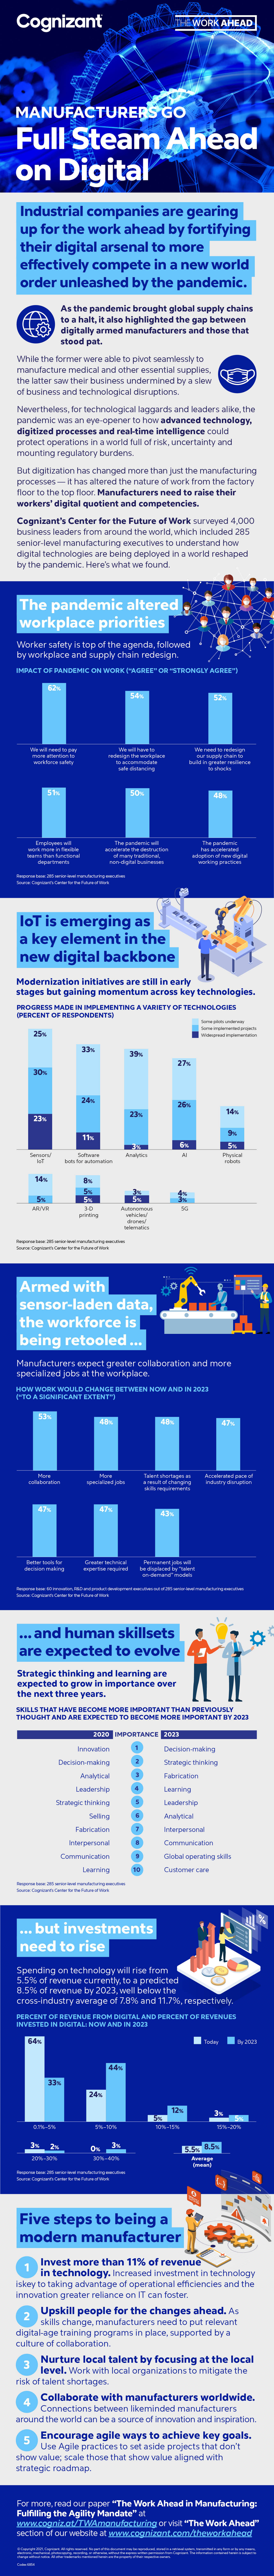 Manufacturers up the Ante on Digital infographic